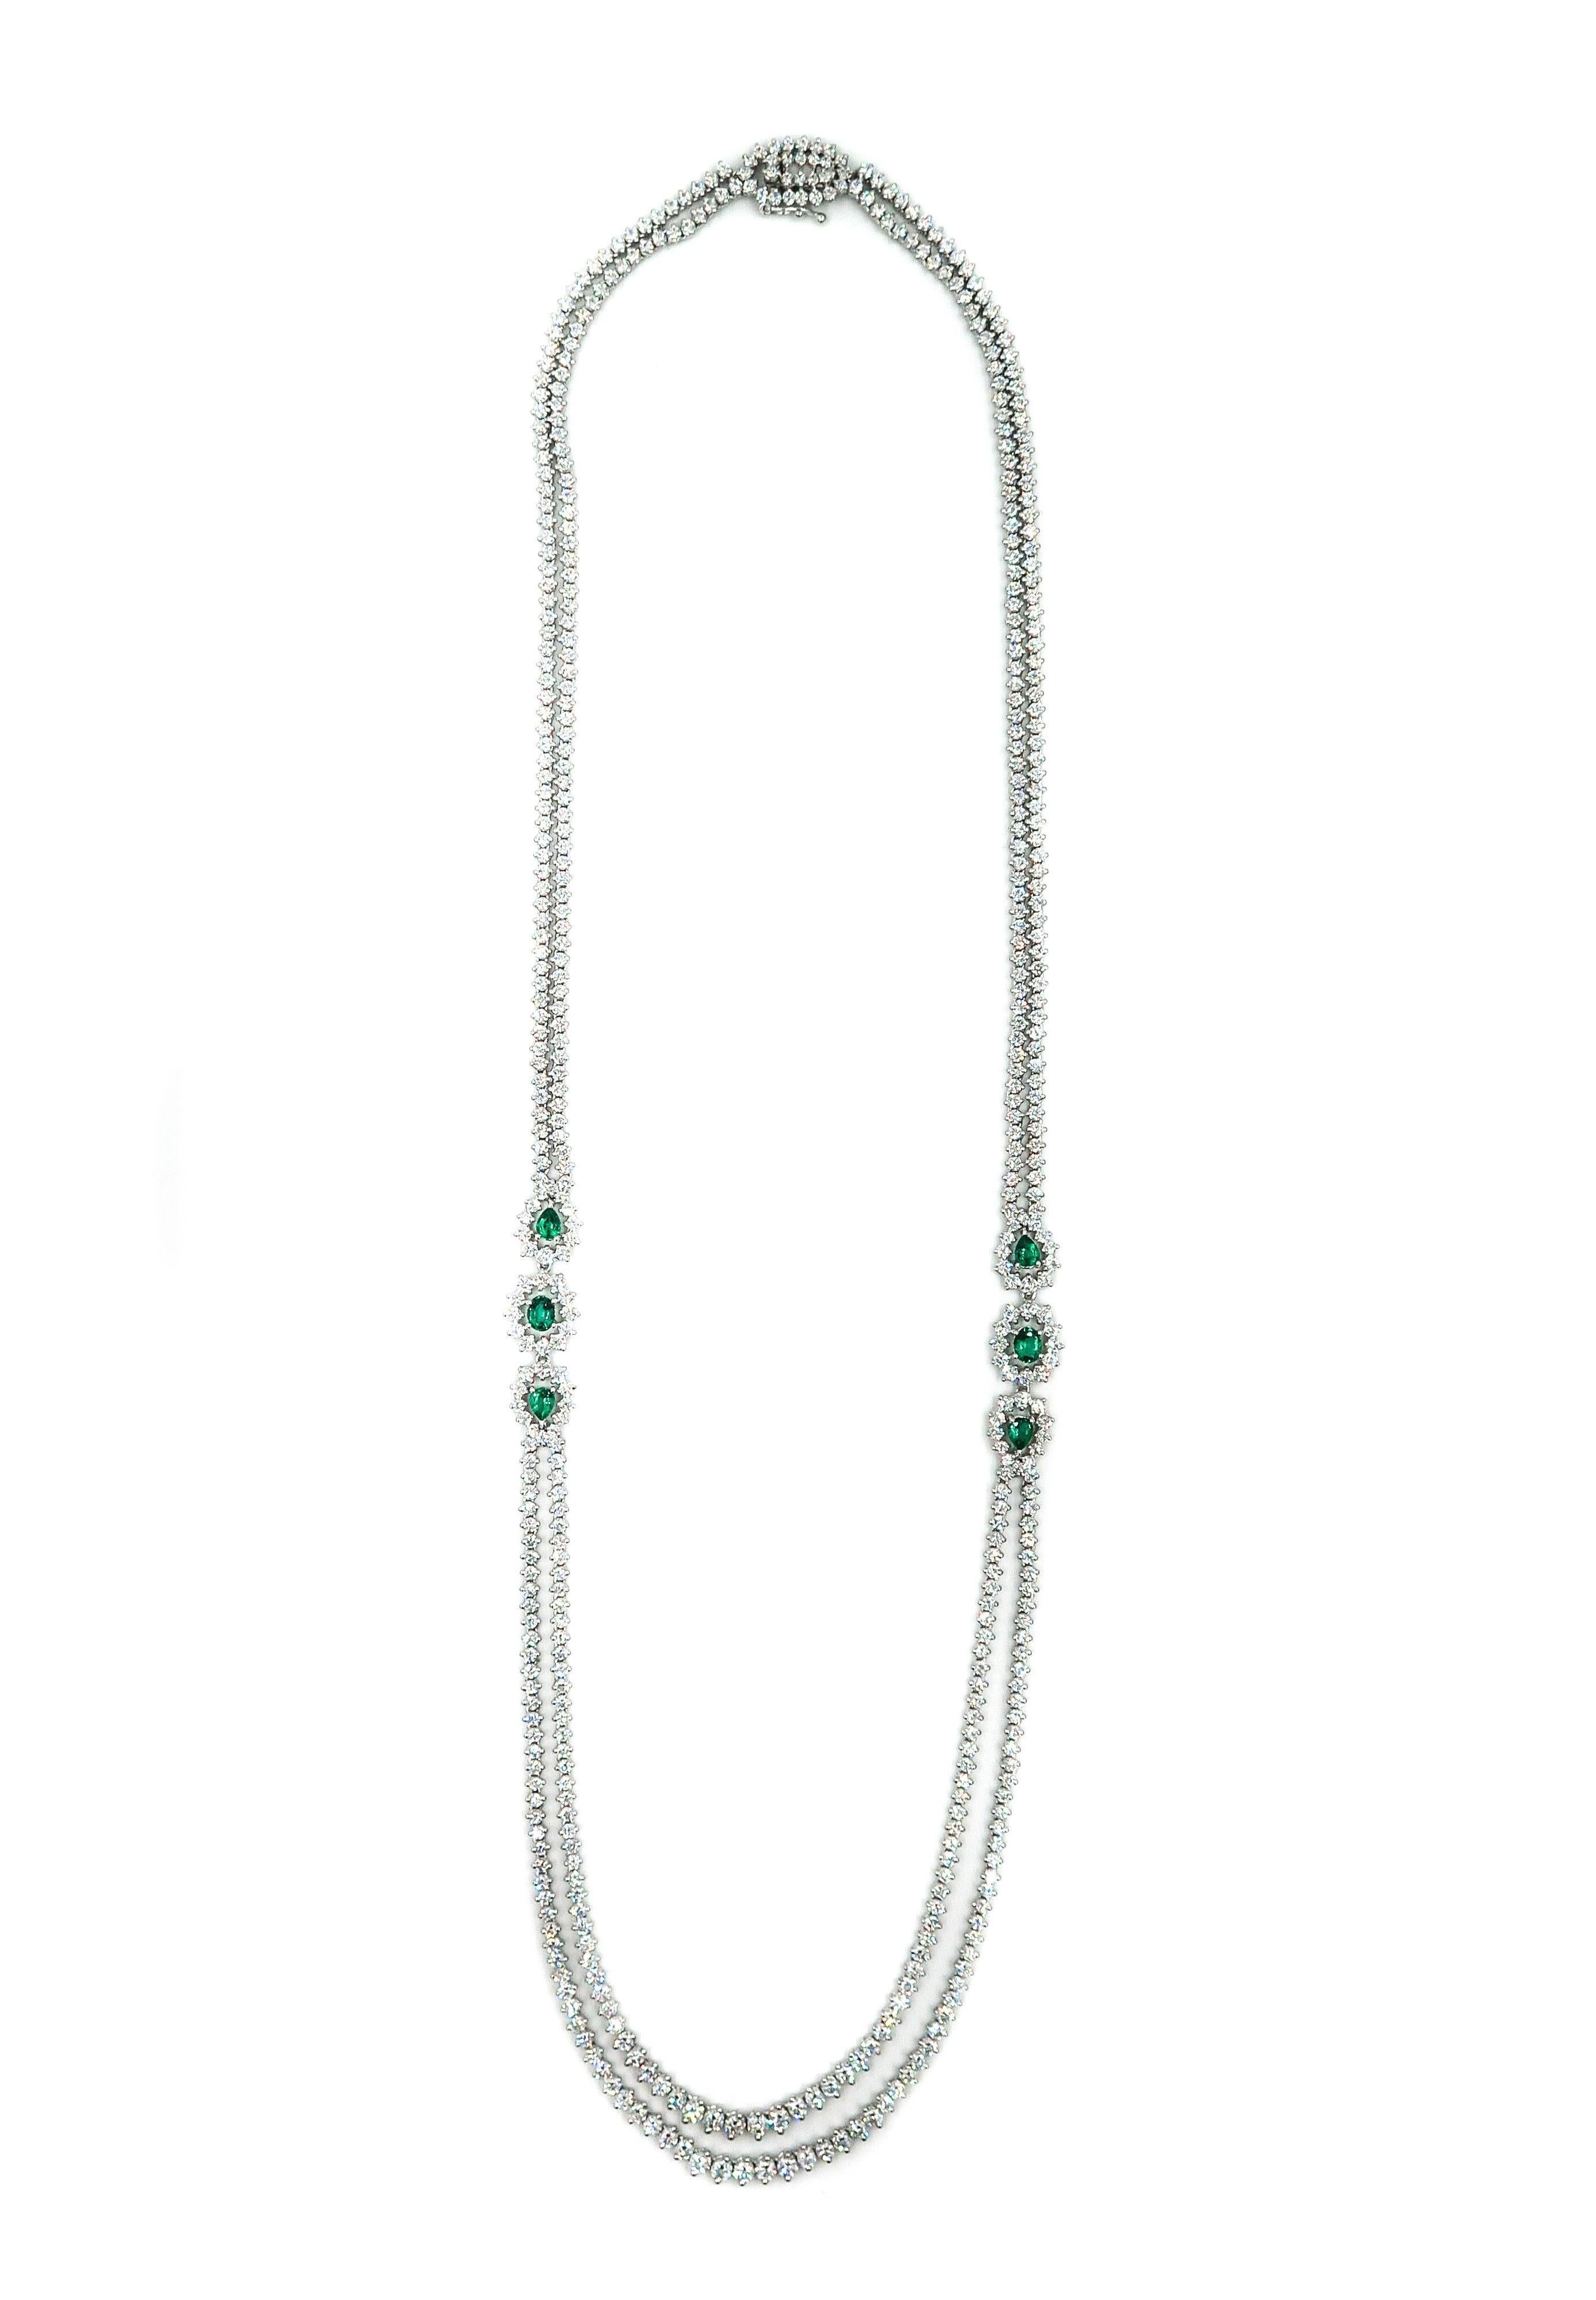 It's easy to be seduced by the elegance and beauty of diamonds and emeralds.
The long standing tradition of fine Italian jewelry making, gives this necklace its unique value and originality. 
A double stranded long riviera necklace comprised of